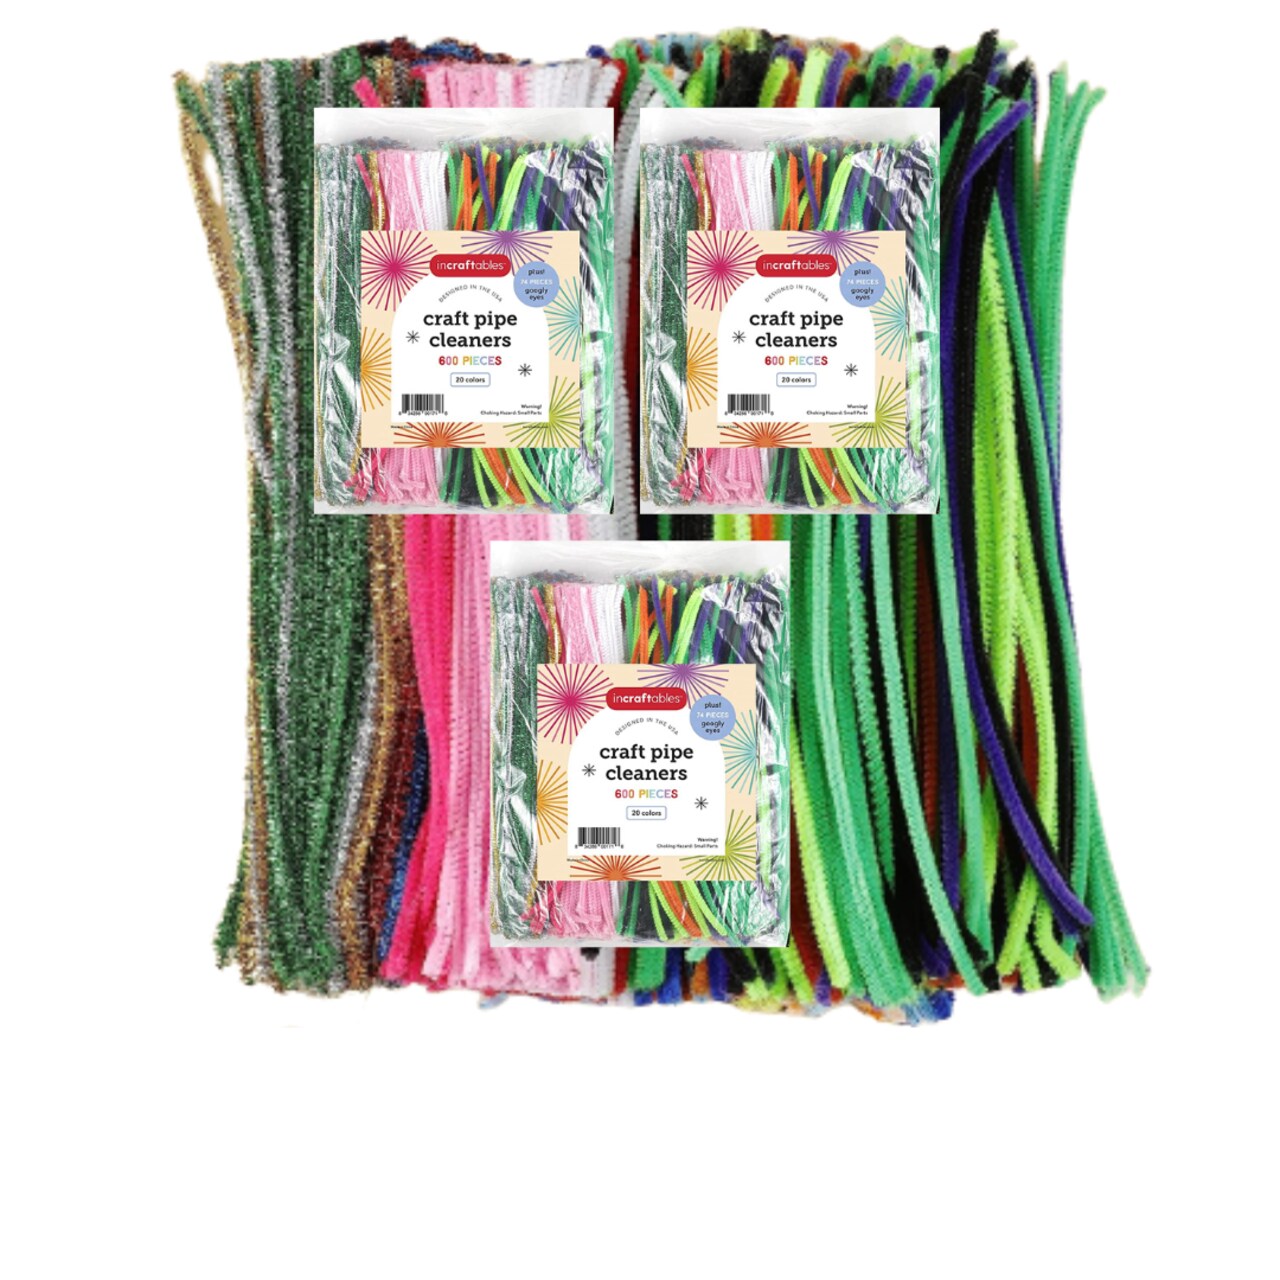 3 PACK - Incraftables 600pcs Pipe Cleaners Craft Supplies Set (20